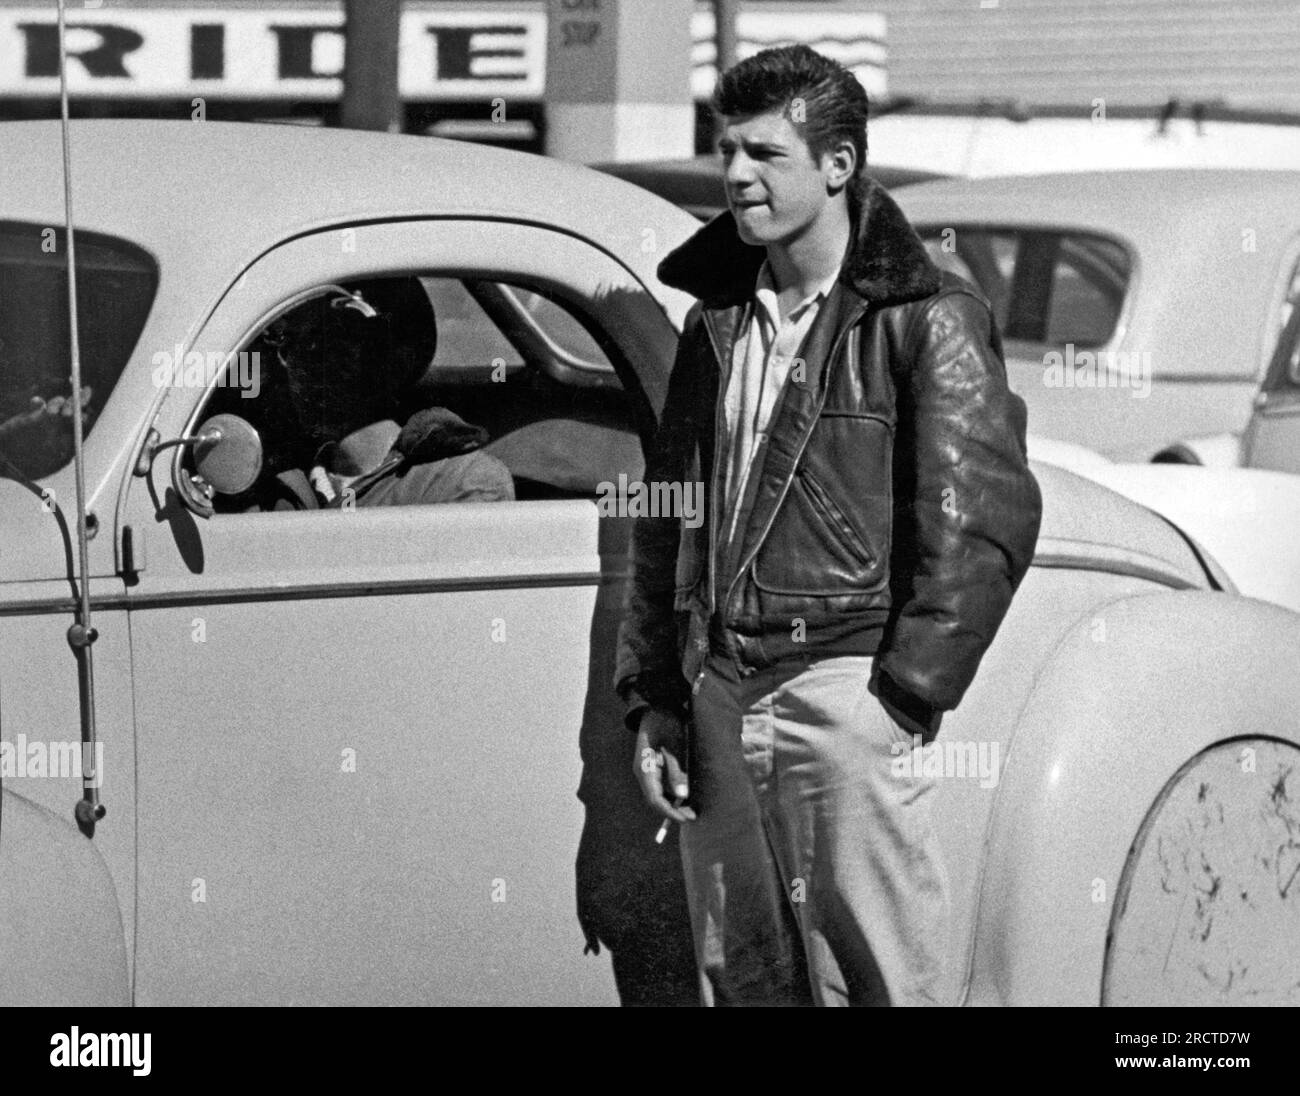 San Francisco, California:  c.1955 A young man with his hair slicked back and his leather jacket collar turned up standing next to a hot rod. Stock Photo